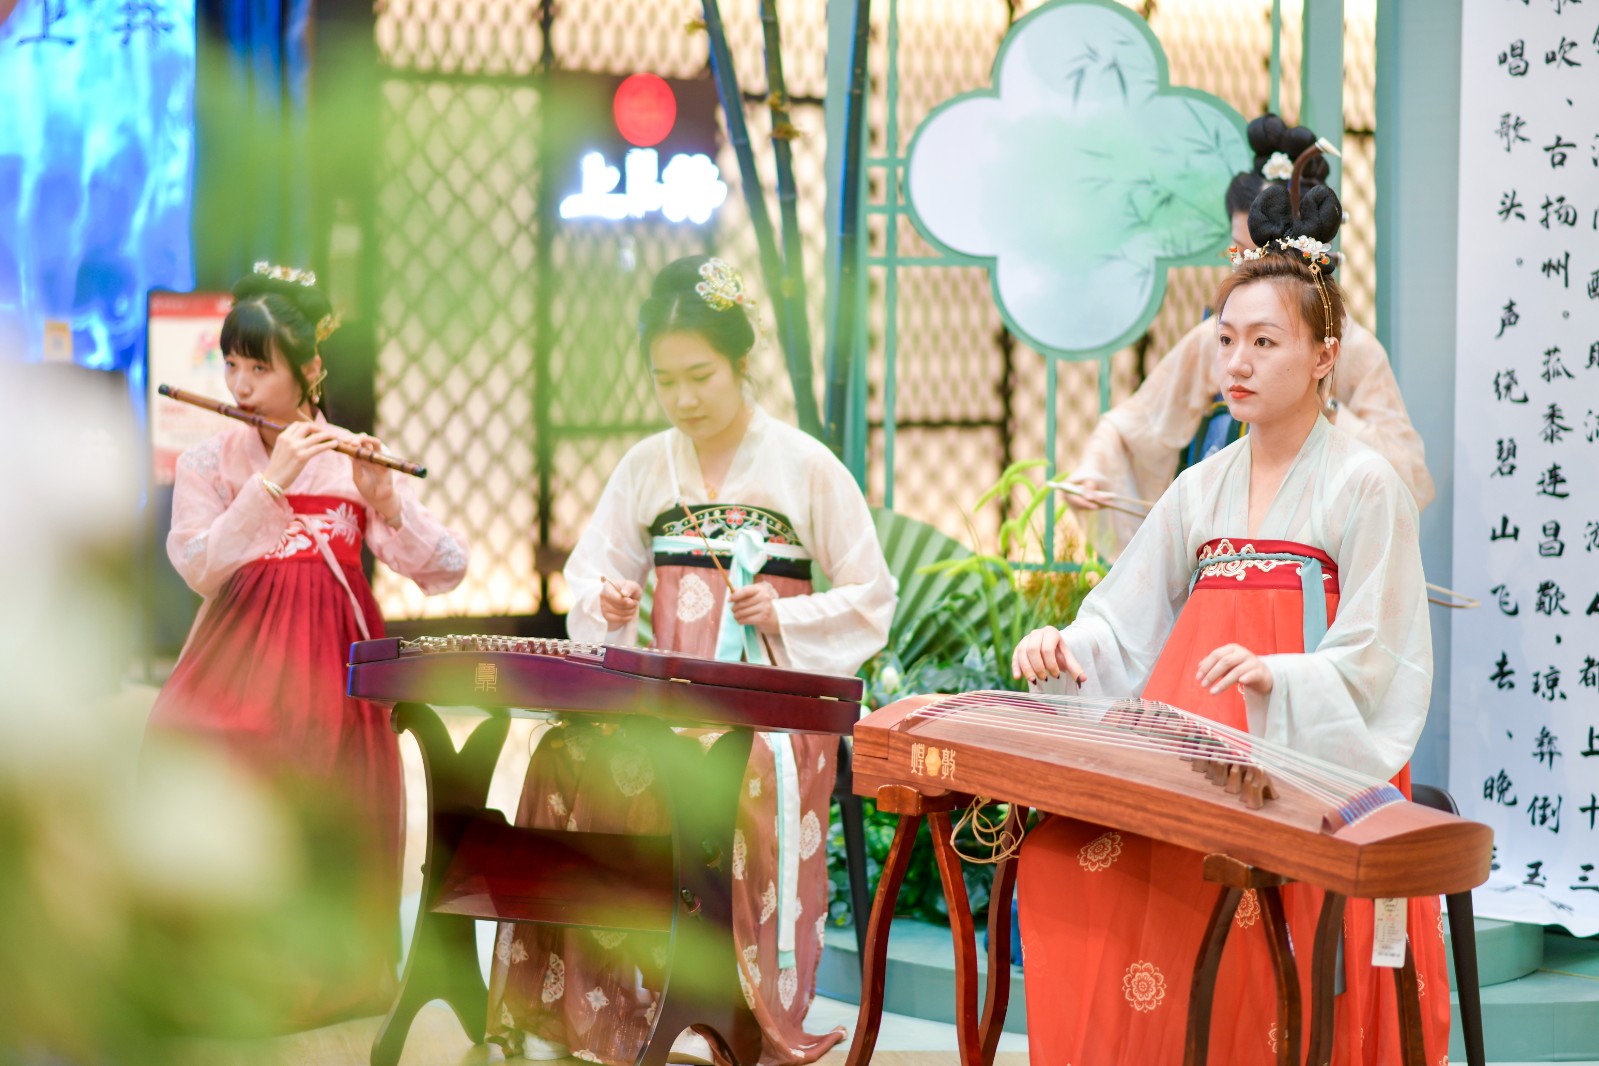 A file photo shows folk musicians dressed in hanfu attire playing music at a traditional Chinese culture-themed fair held in Jinan, Shandong Province to celebrate Duanwu Festival, or Dragon Boat Festival. /IC